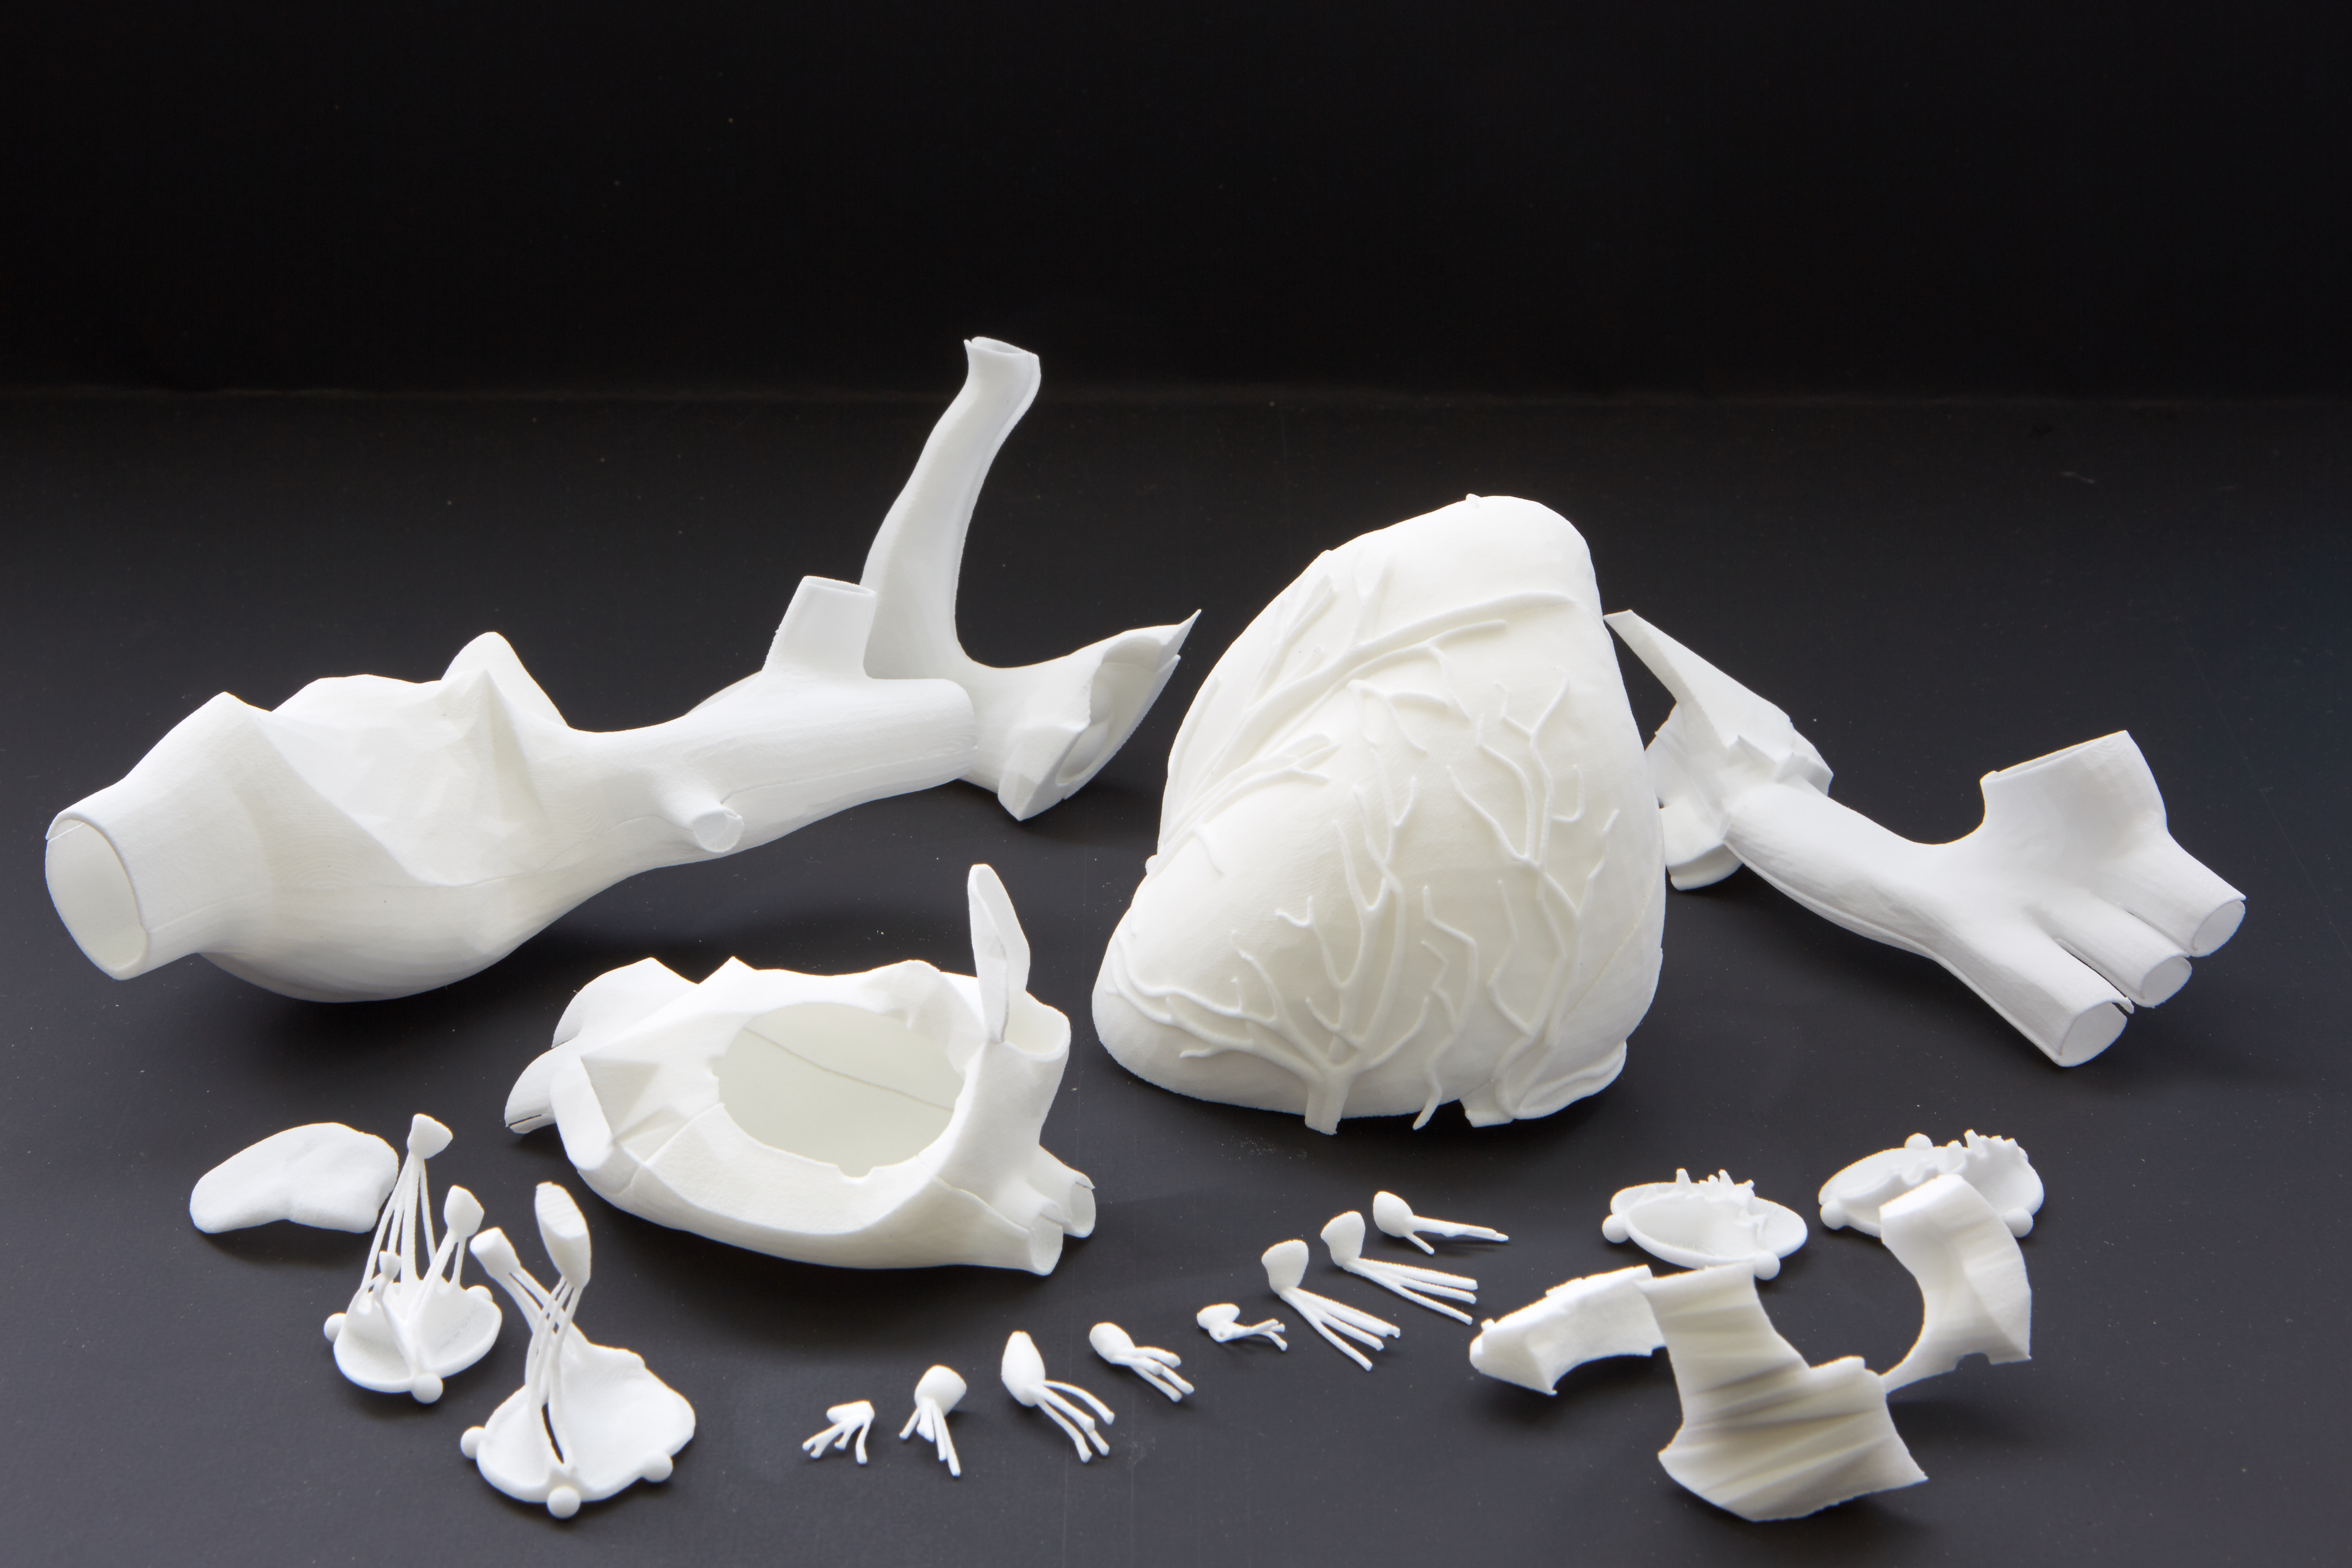 Prototypster has manufactured a silicone 3D model of human heart